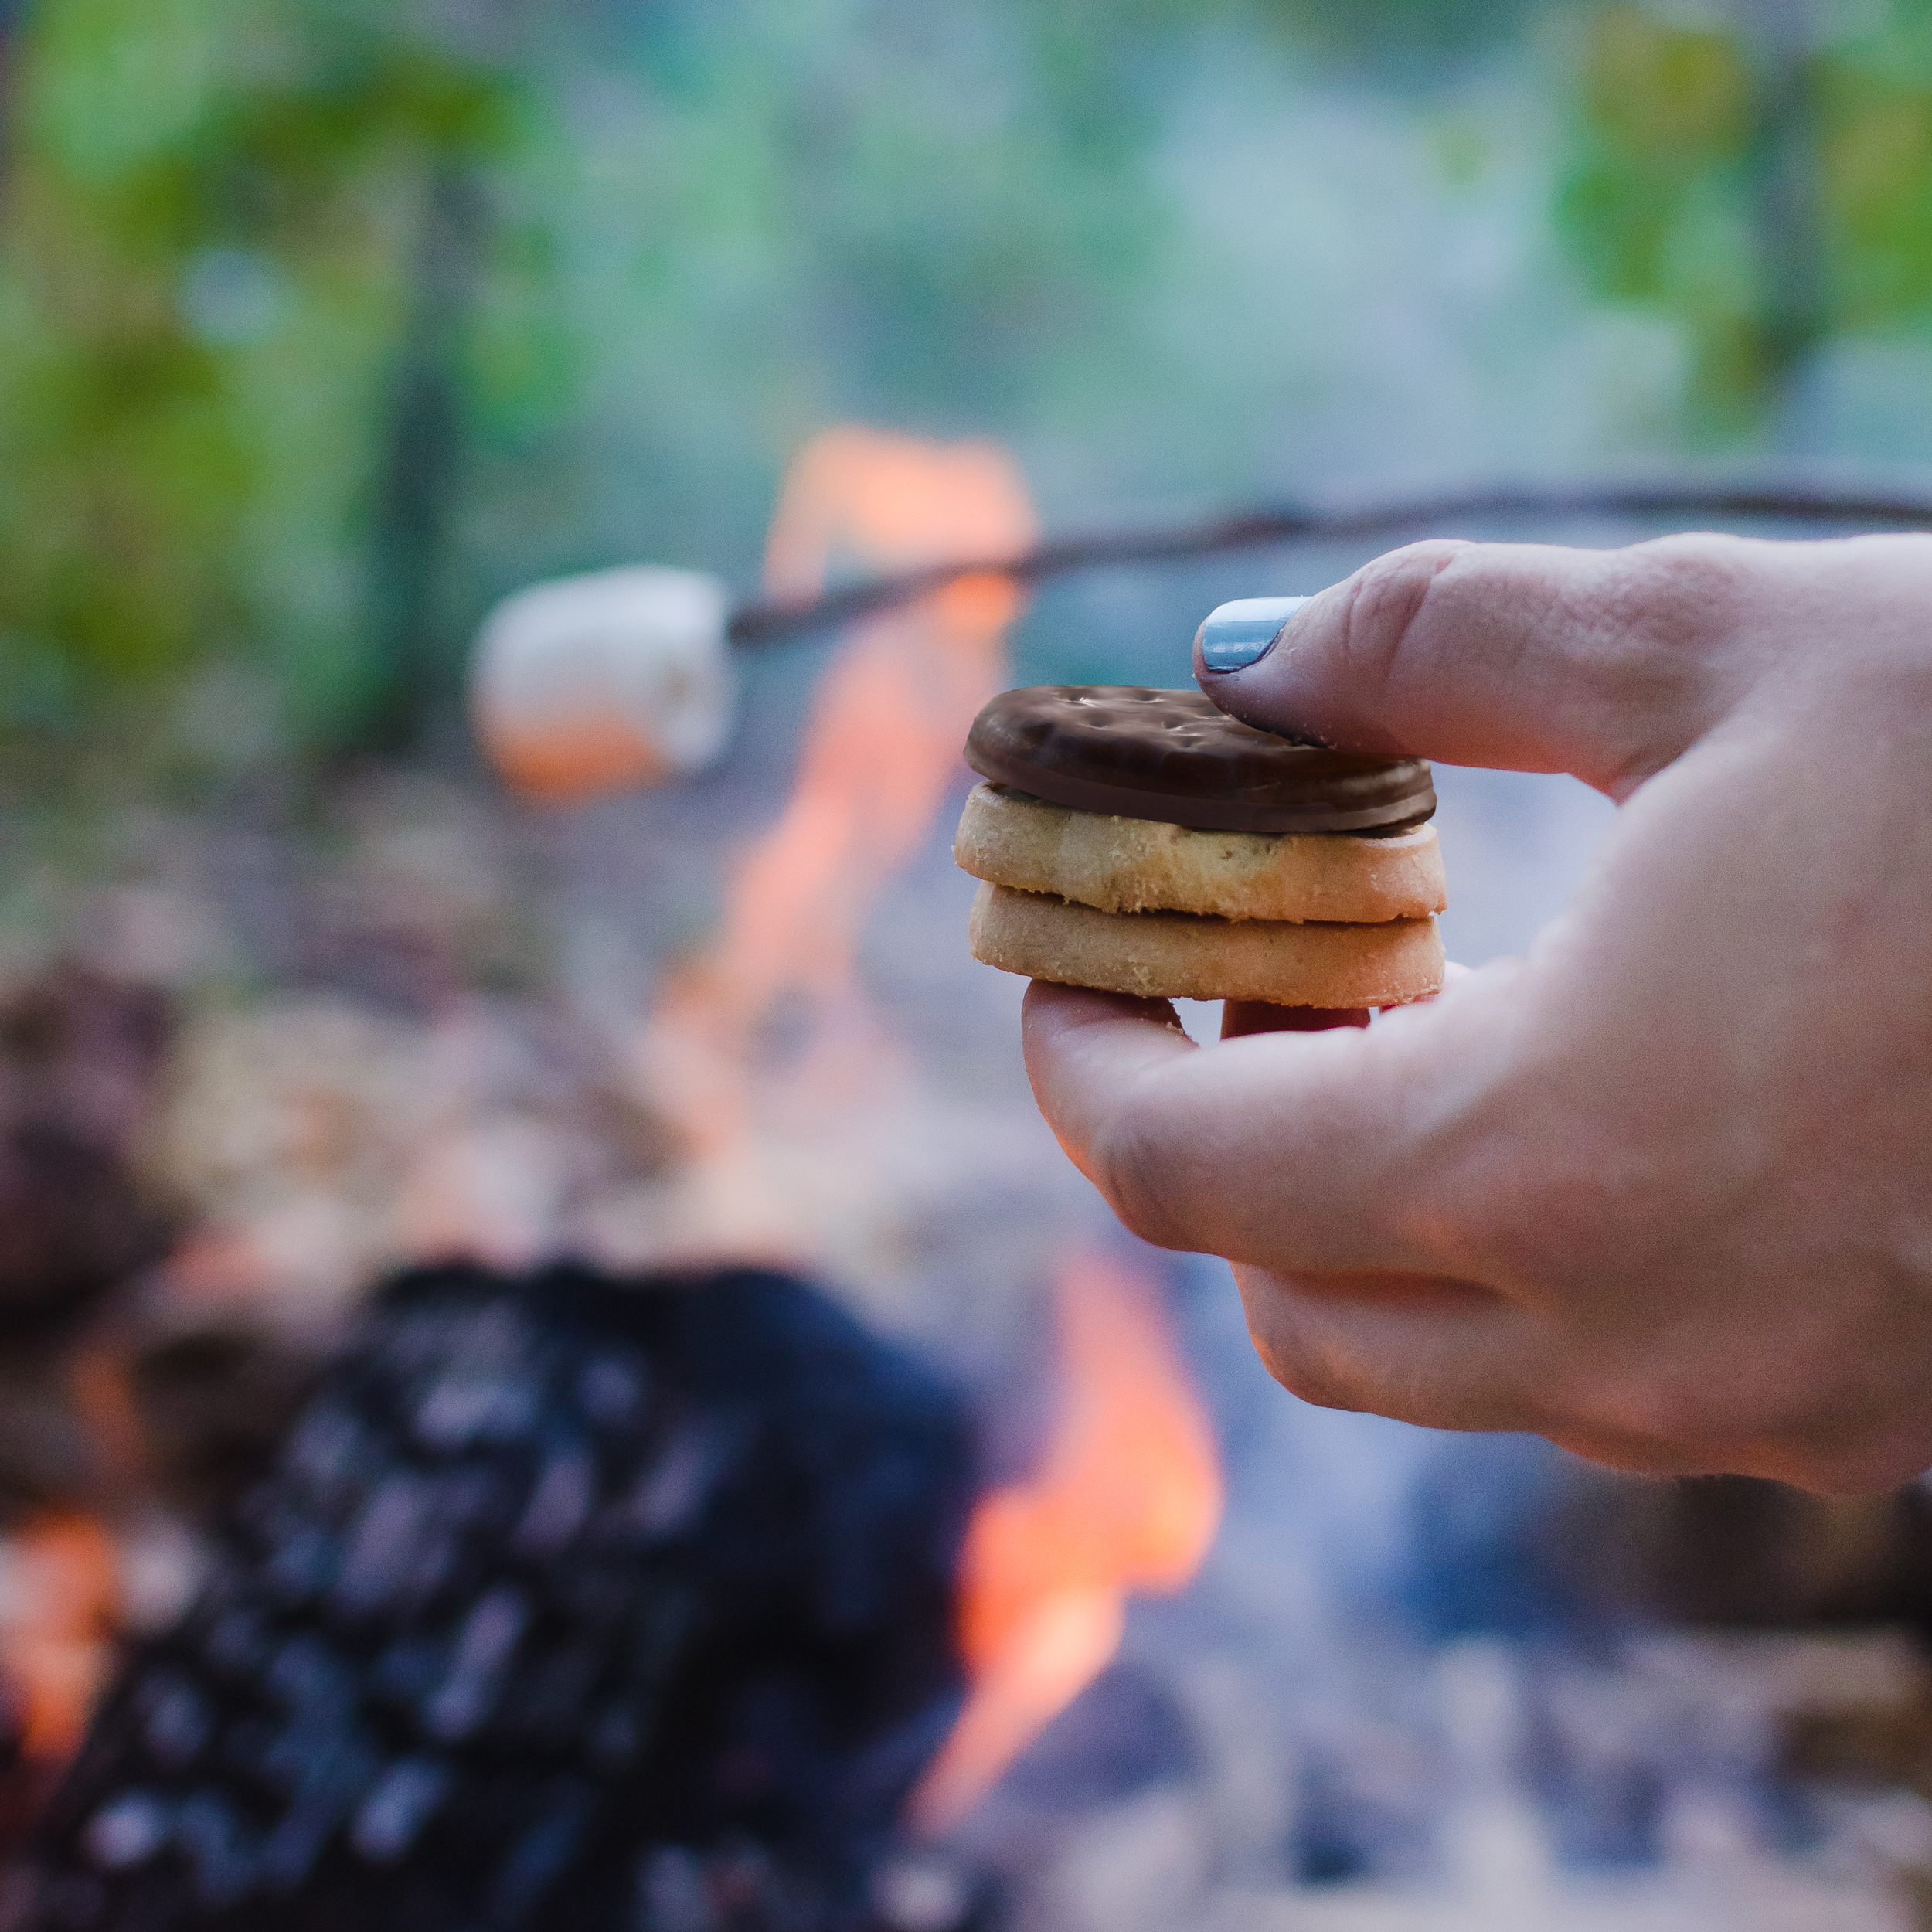 Girl Scout cookies and s'mores at a campfire